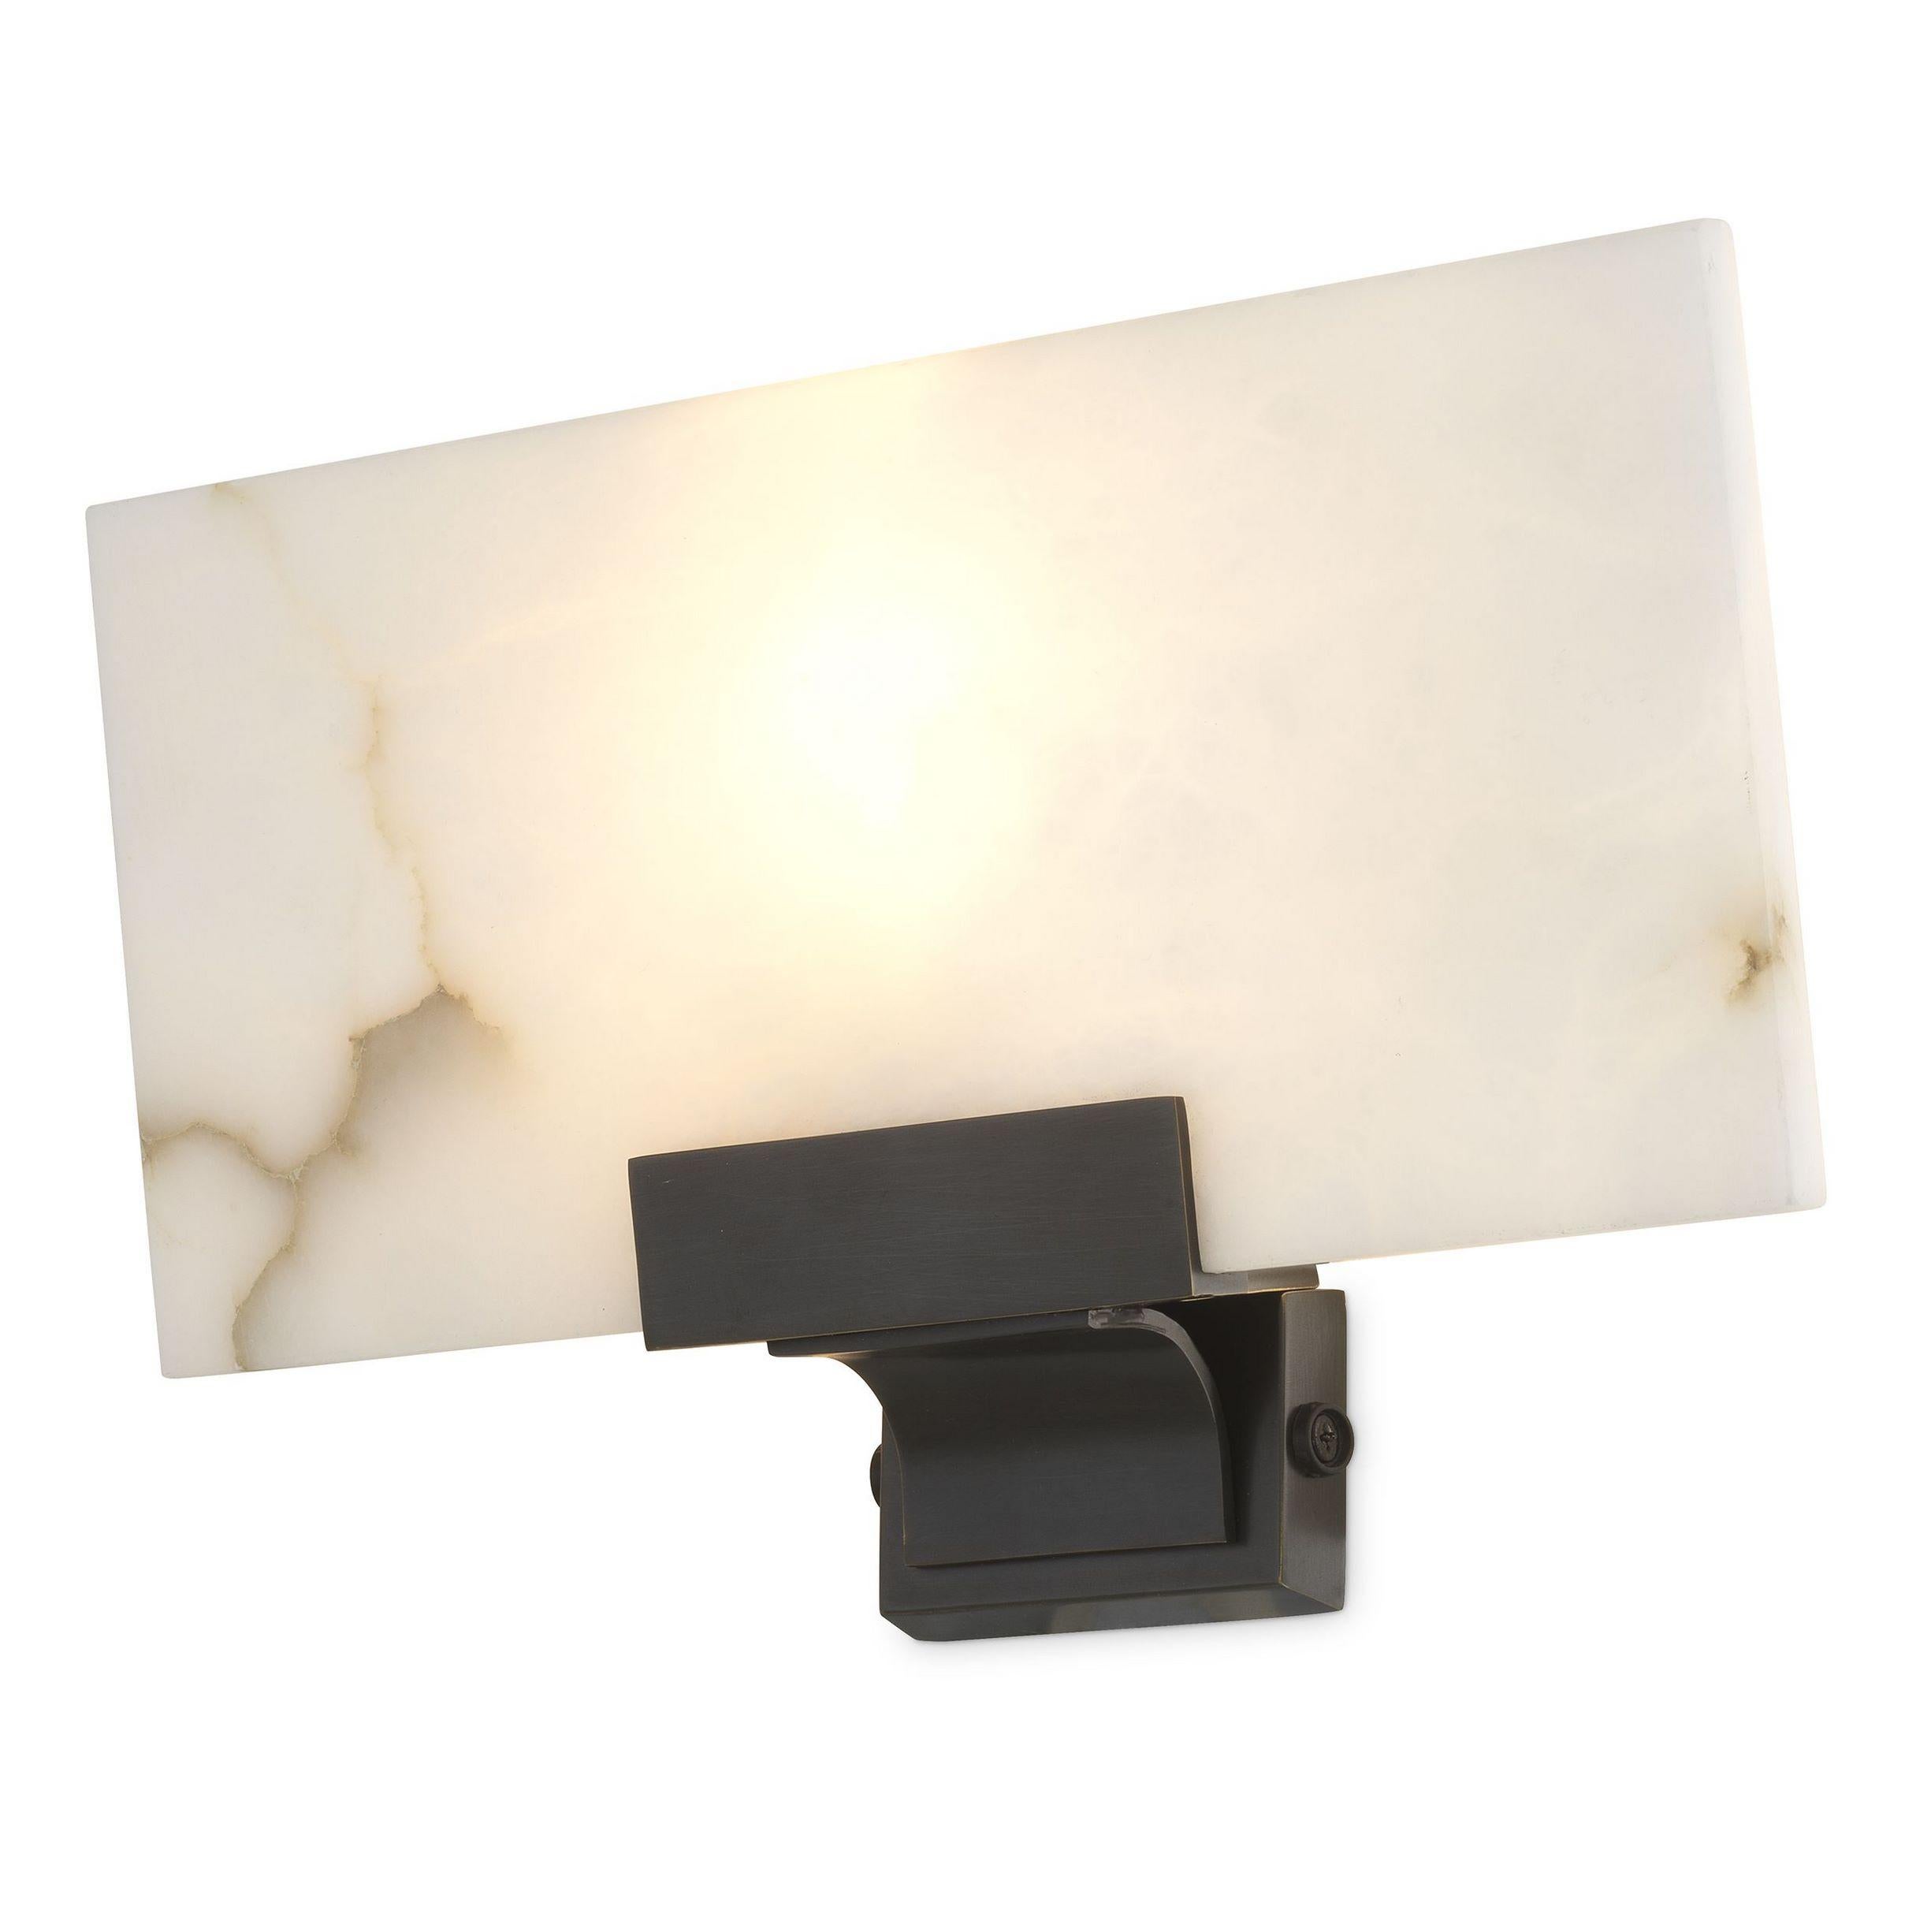 Bronze finish and white alabaster wall light, elegant, presence and class all in transparency. New item, never used.